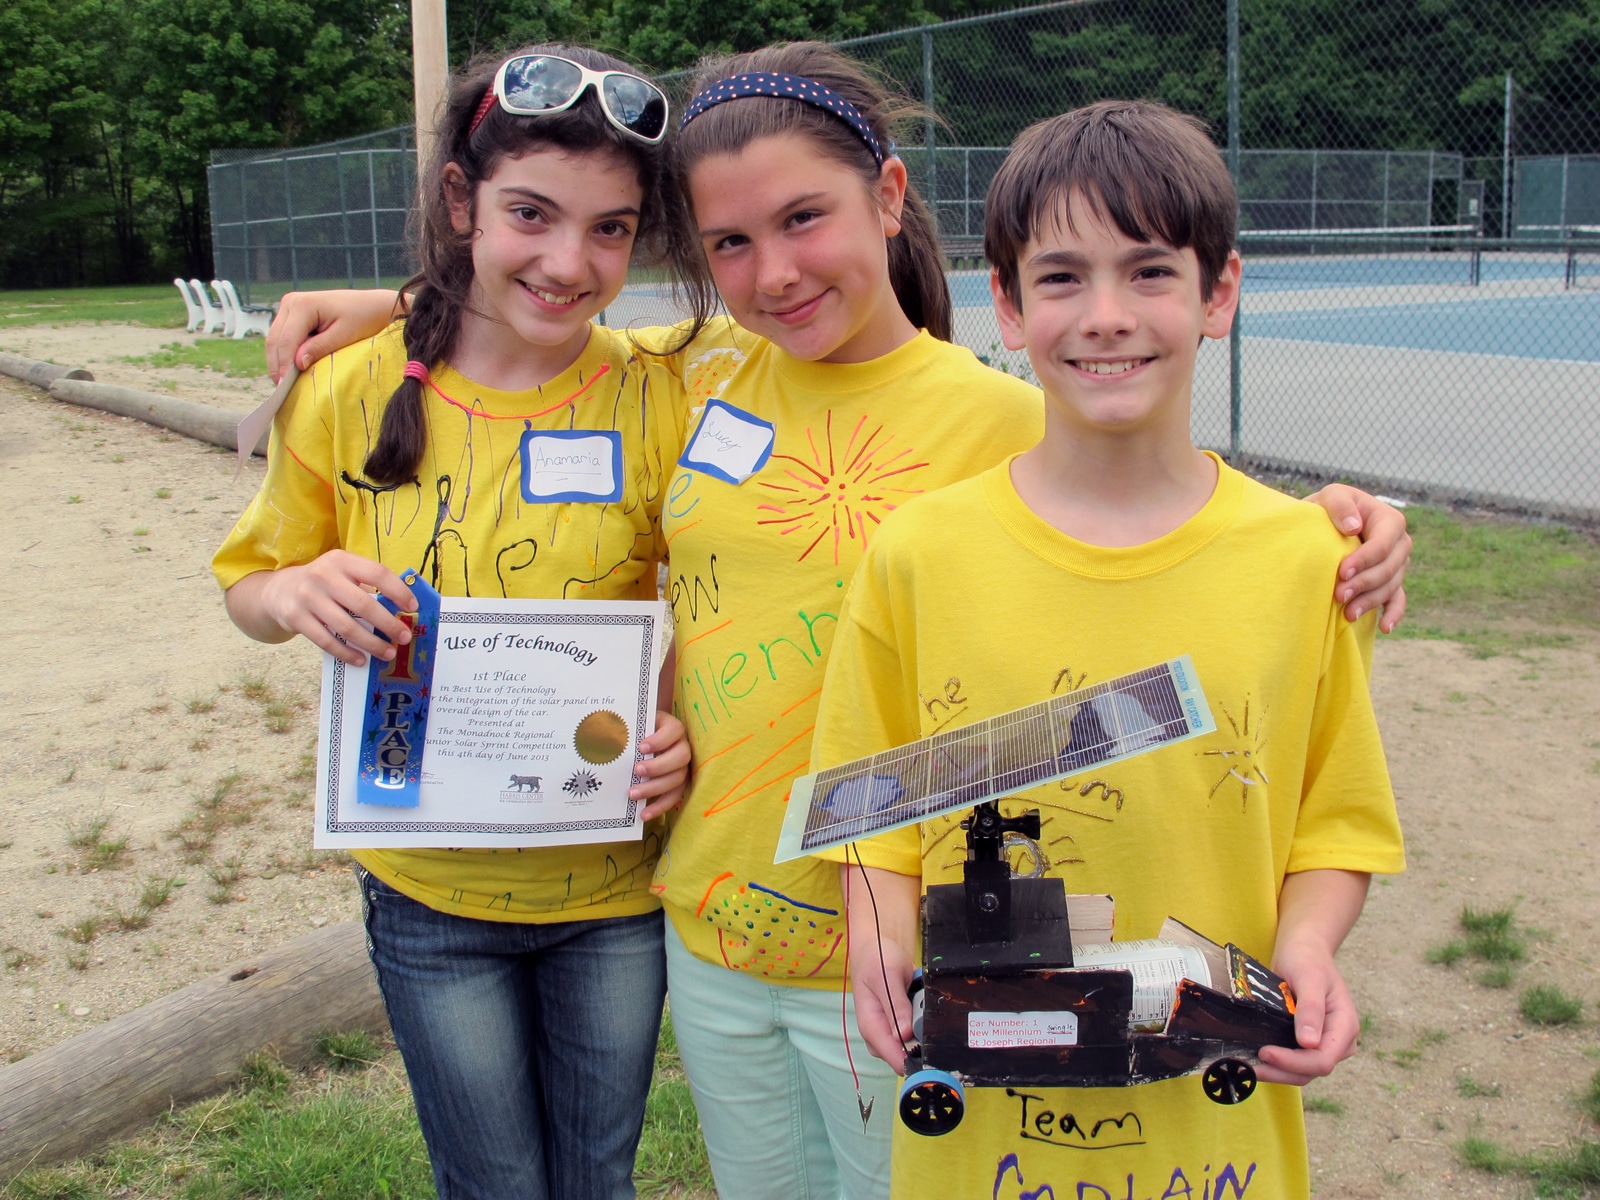 Team New Millenium from St. Joseph's School in Keene, with their solar-powered modeled car and award for Best Use of Technology. (photo © Brett Amy Thelen)